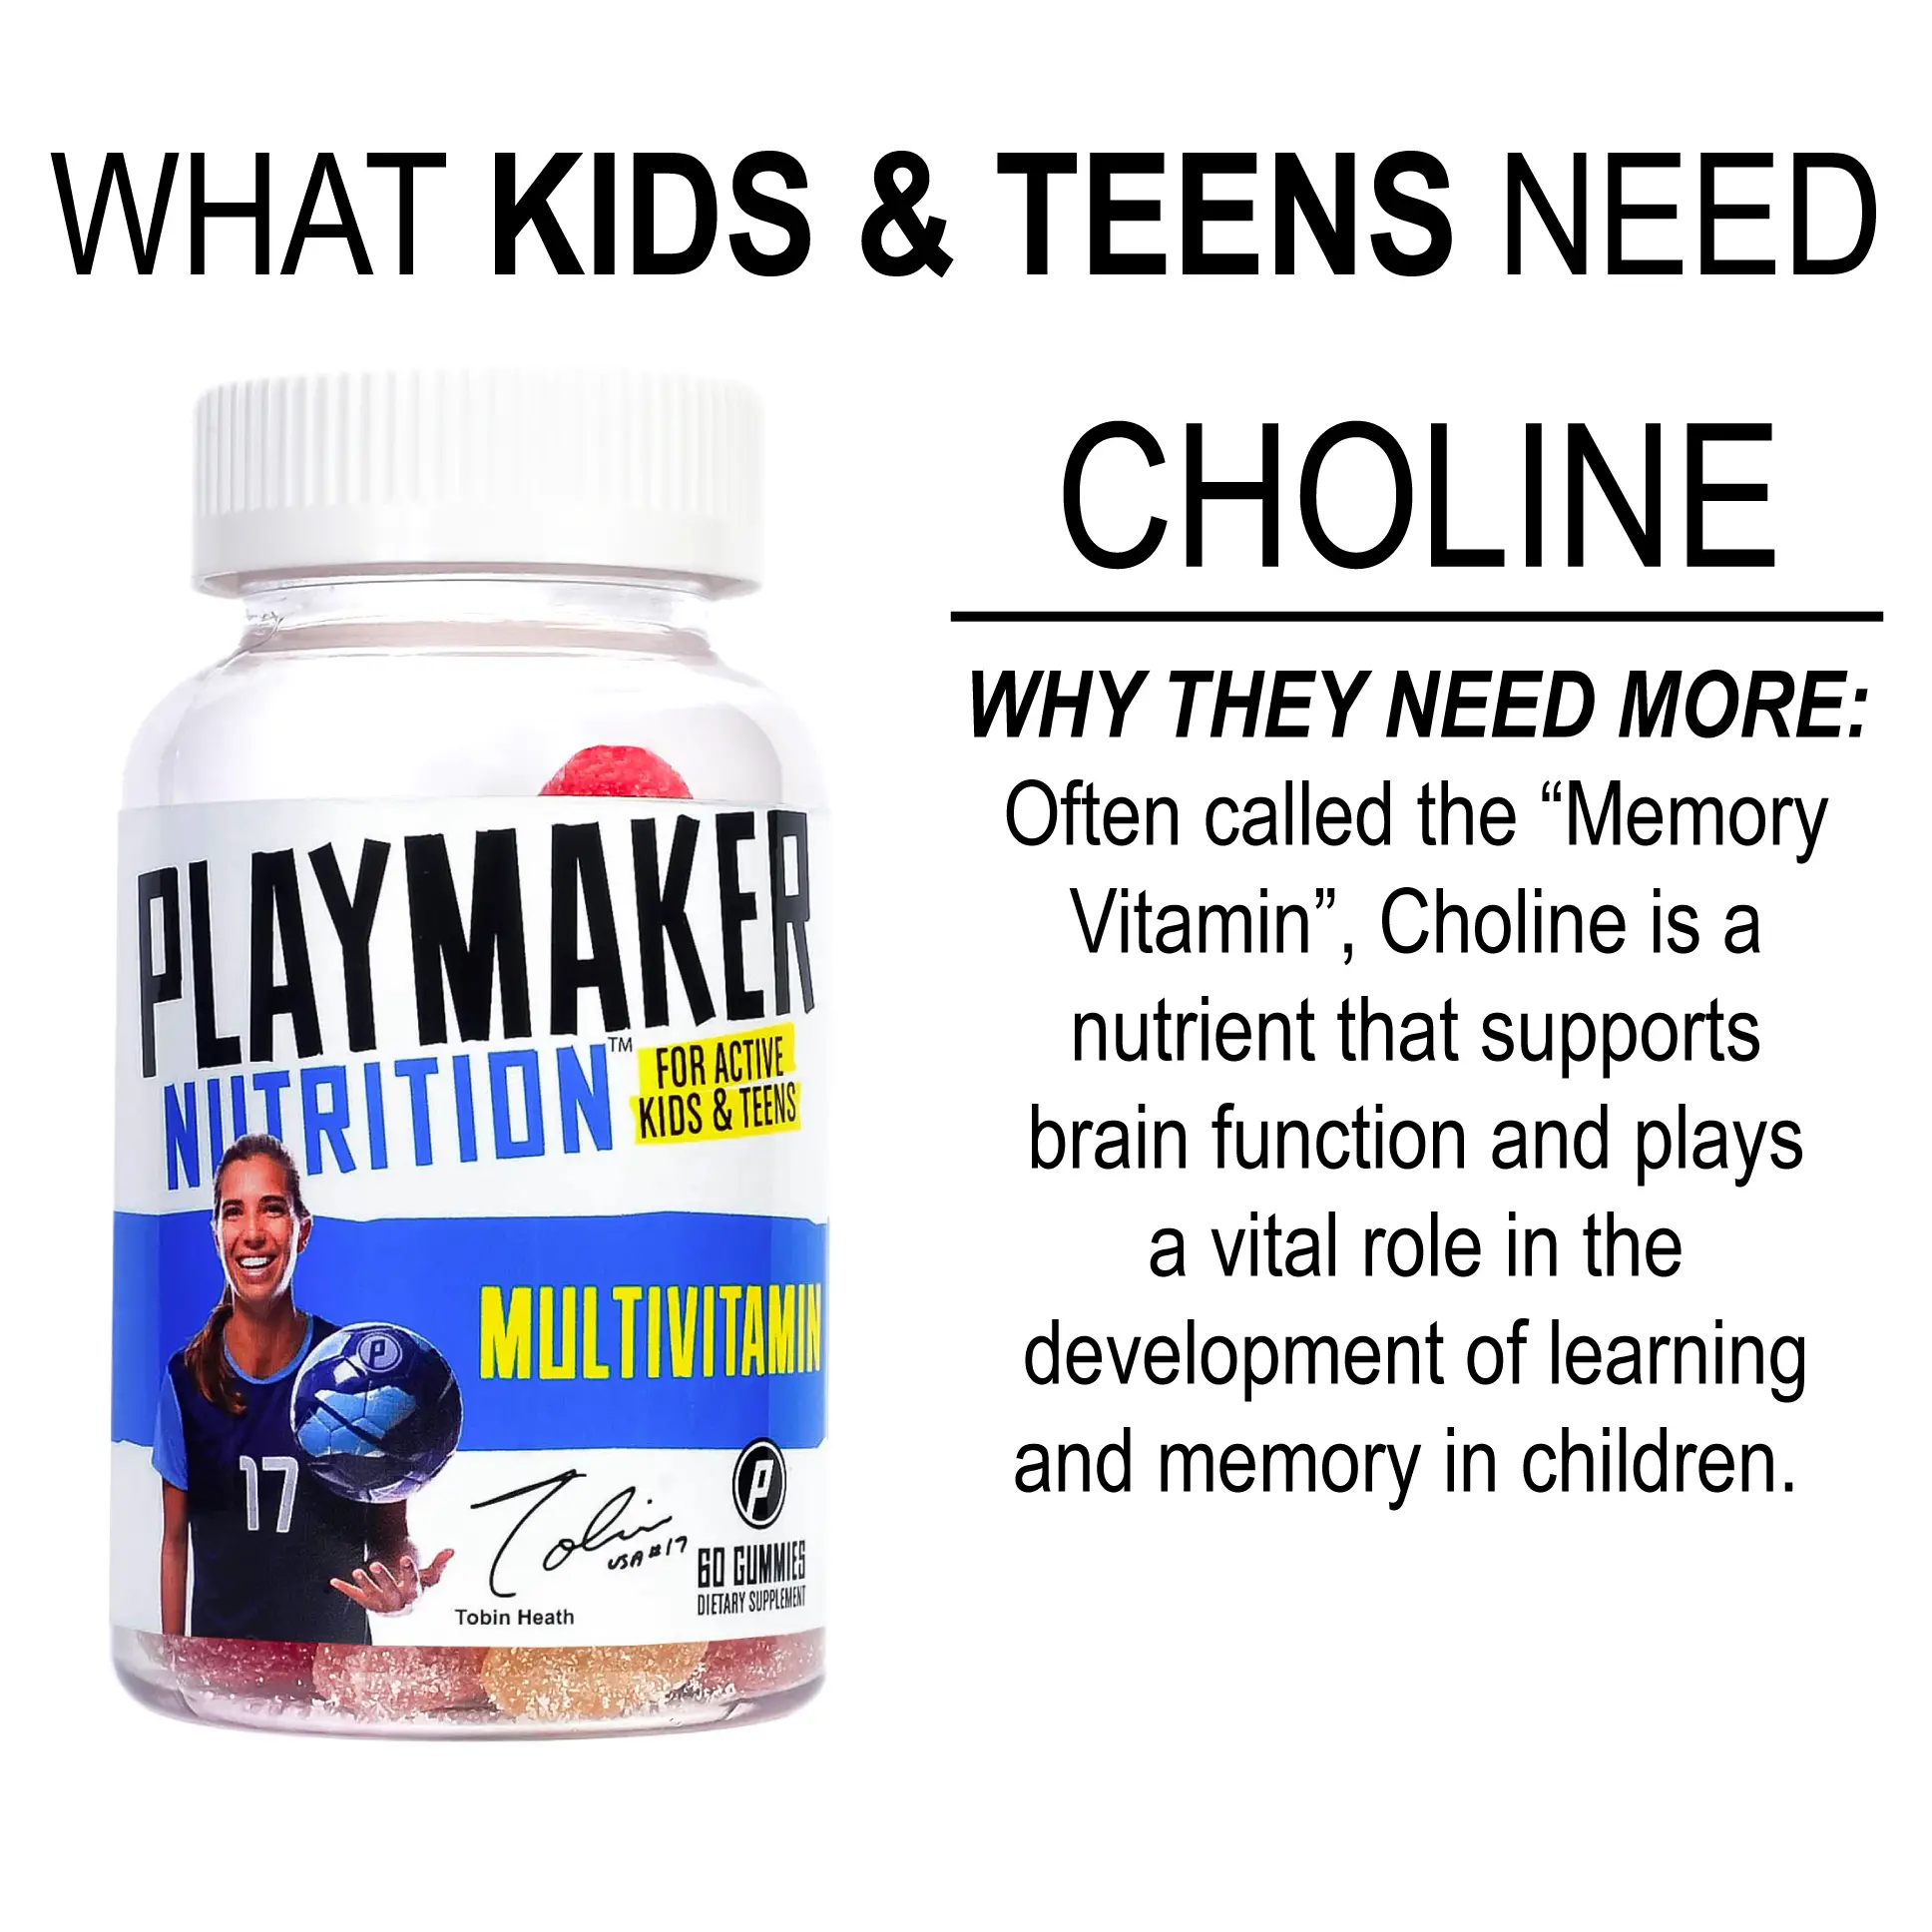 Everyone could use a " memory vitamin"  right?